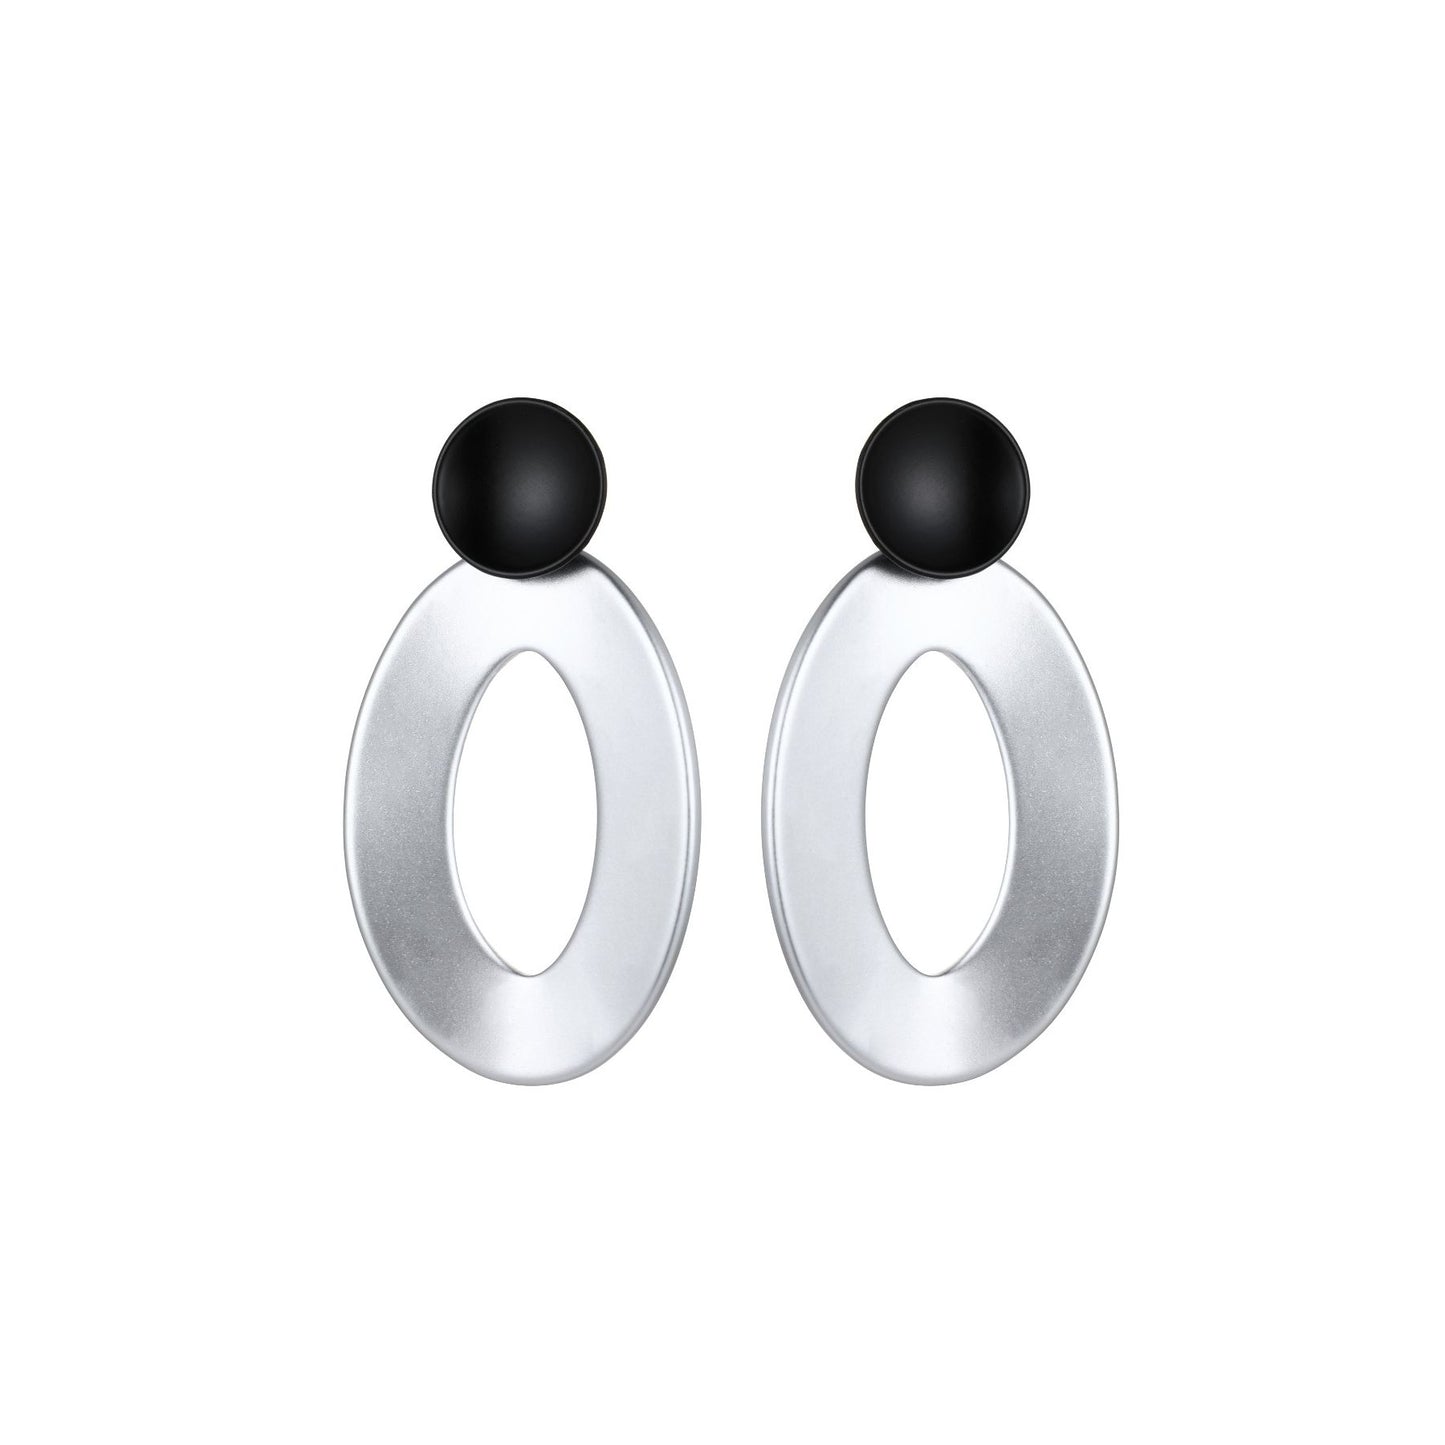 Darling - Black and Silver Resin Oval Oversized Earrings - from Frinkle